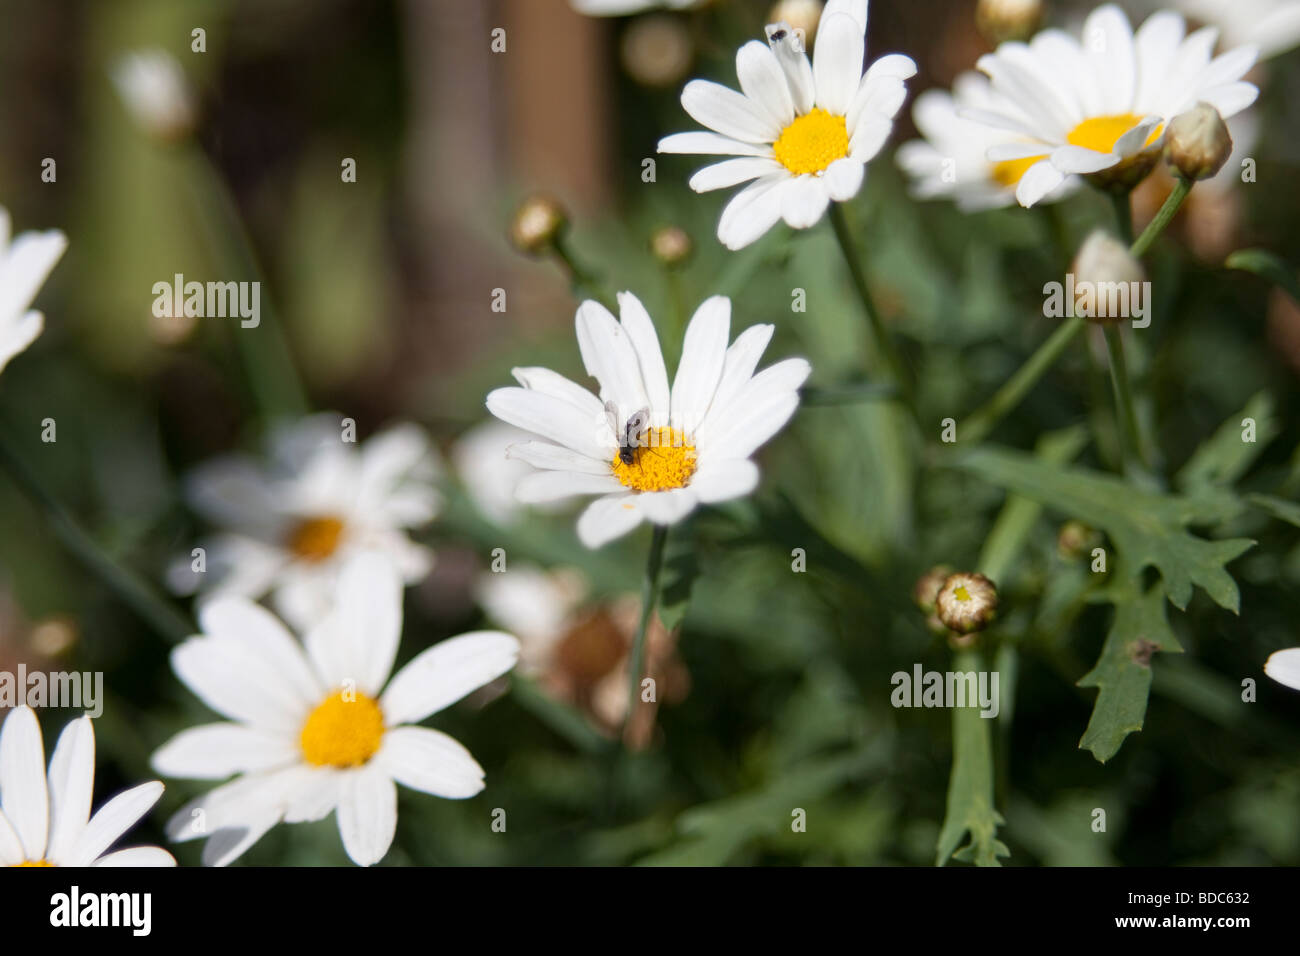 Anthomyiidae indet. sip nectar from a Daisy flower Stock Photo